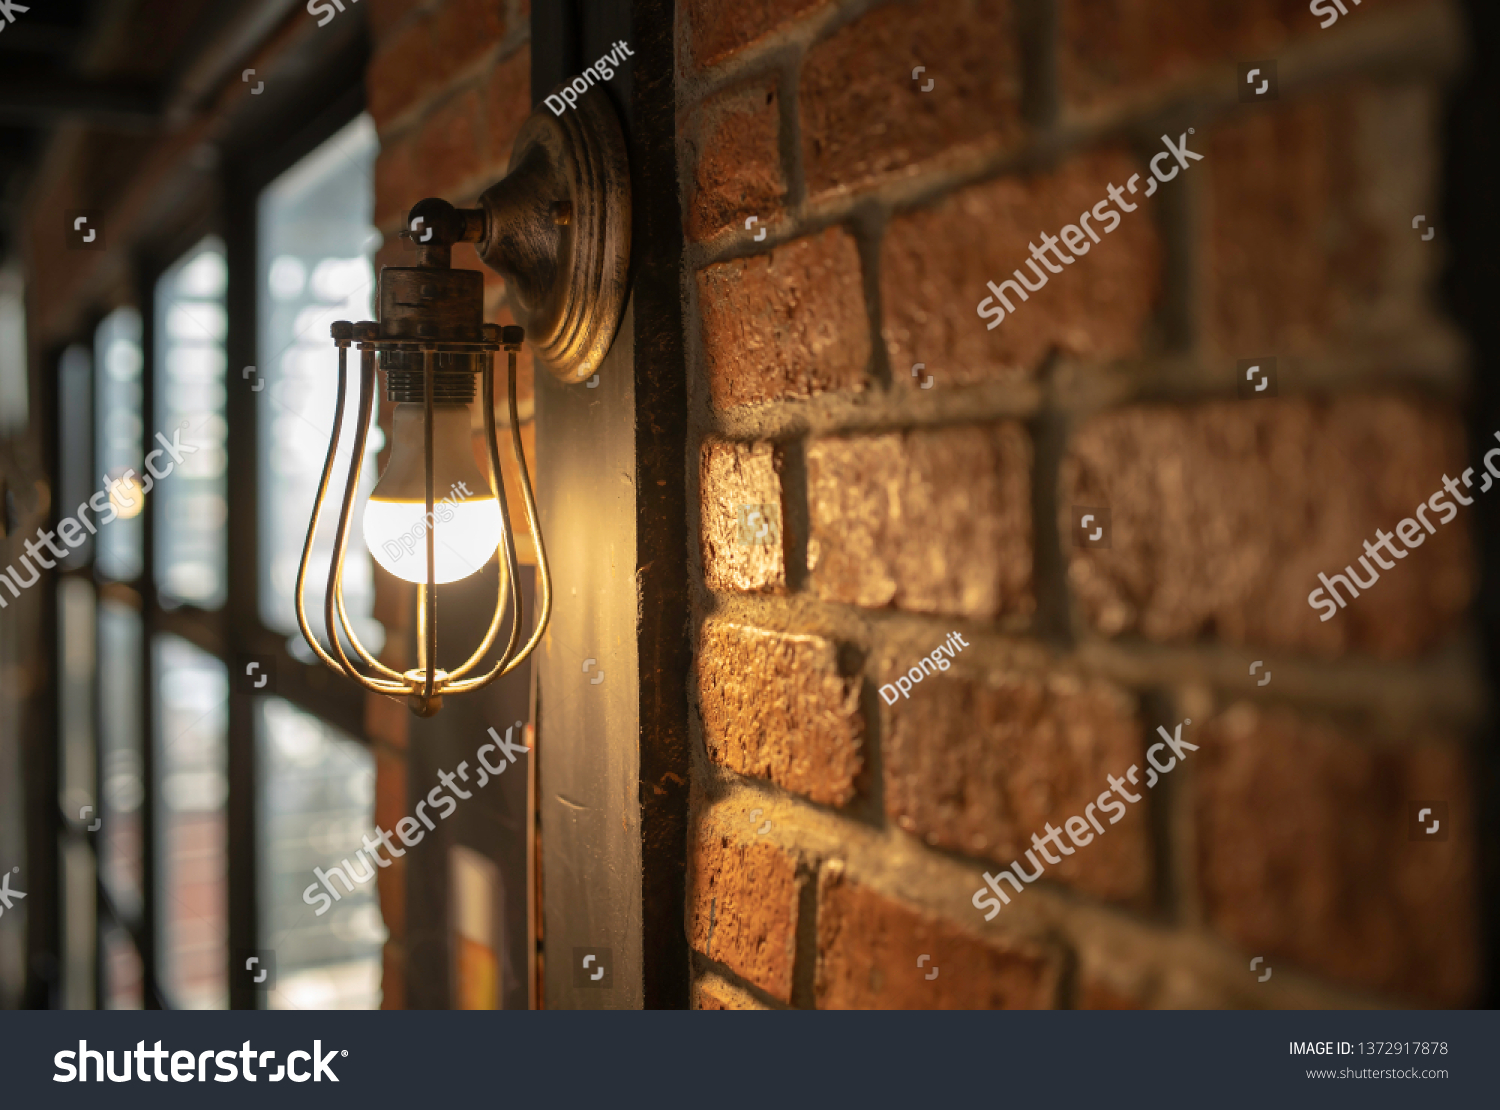 Antique electronic lamp, red wall lamp, high wall lamp, soft light.Red brick wall.Open chain, turn off the lights.hanging at the red brick wall in the building,Wall light brown brick,soft focus. #1372917878